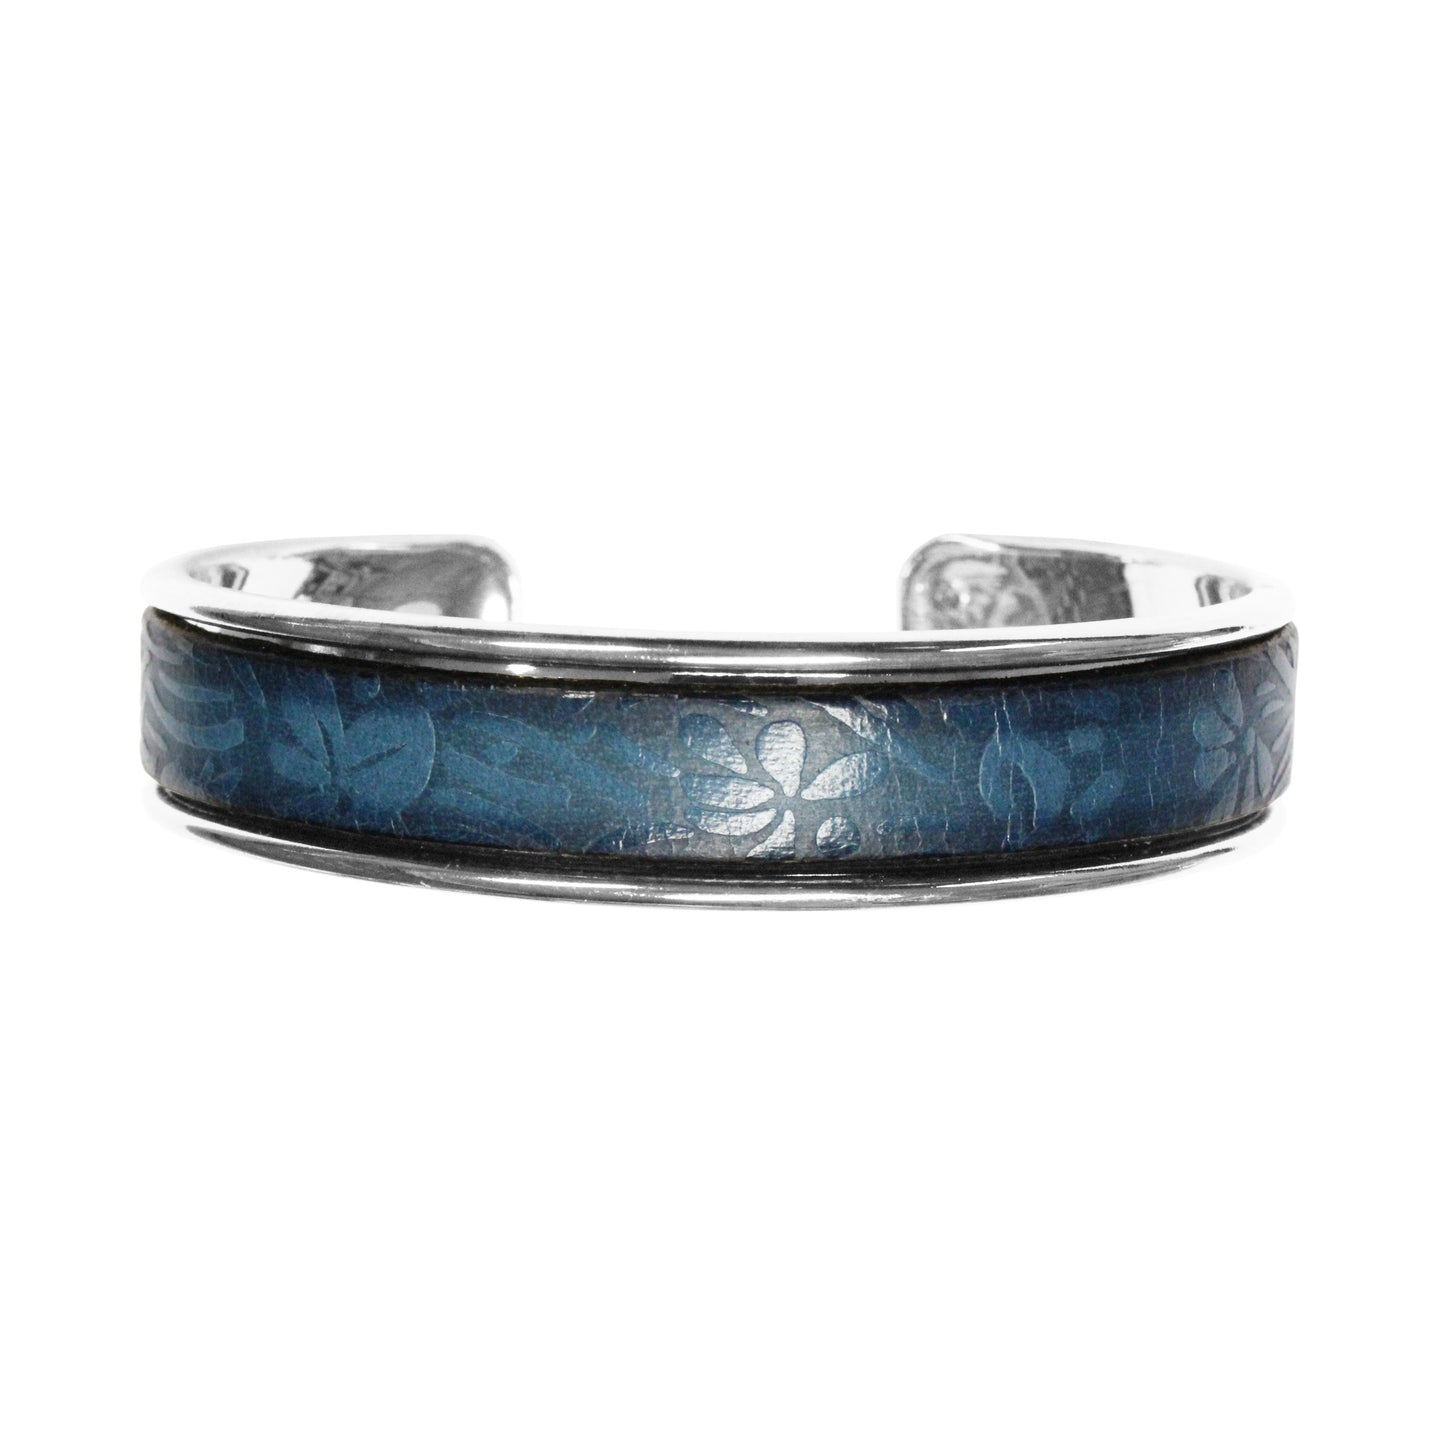 Blue Leather Cuff Bracelet / fits up to 7 inch wrist size / embossed floral leather / rhodium plated cuff